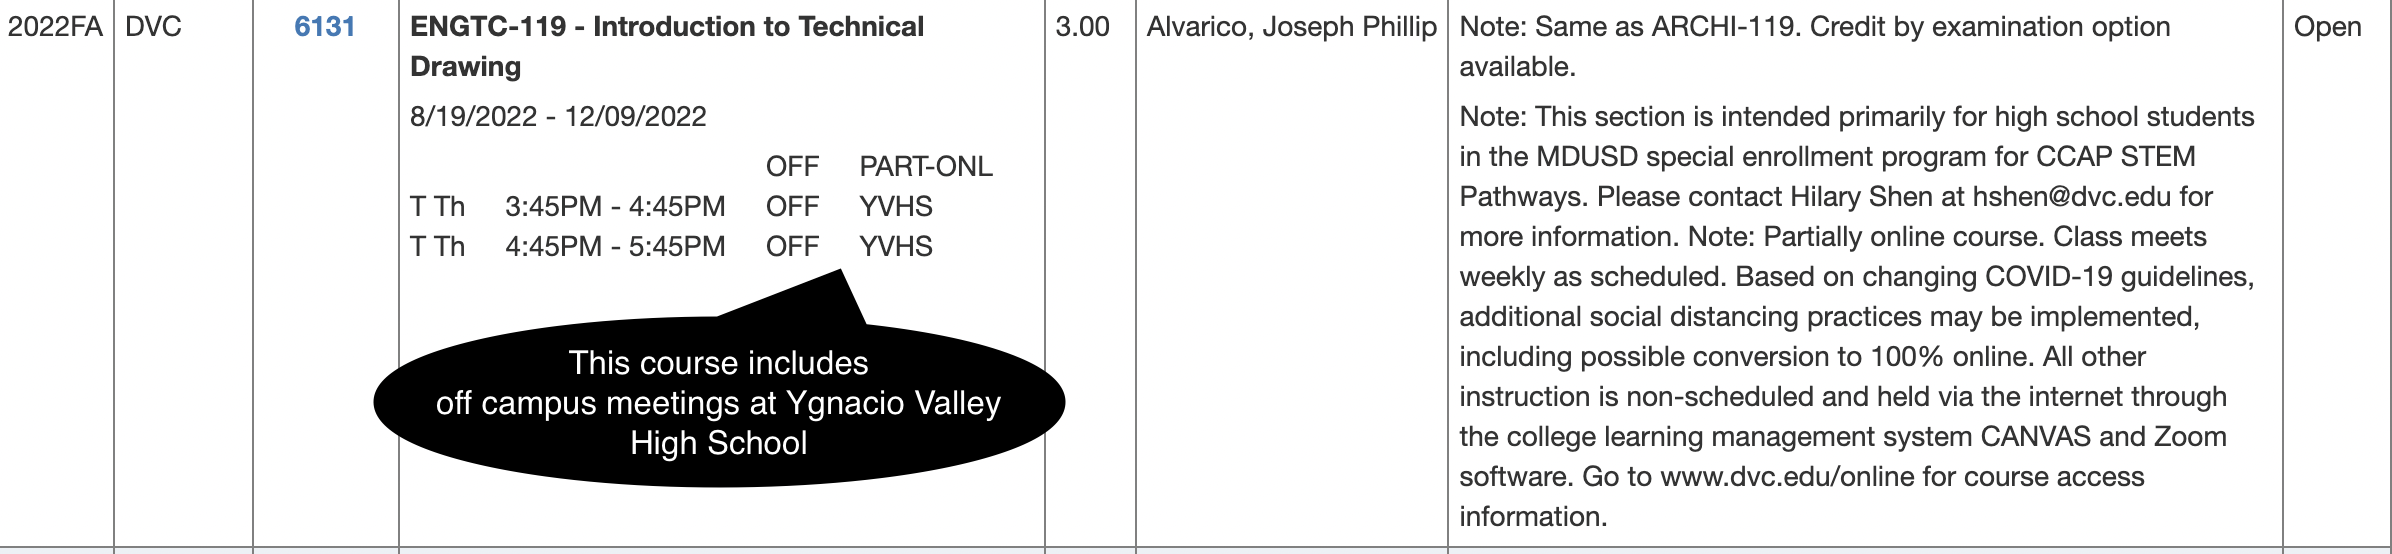 screenshot of off campus course notes listing days, times, and location as "OFF" "YVHS" (Ygnacio Valley High School)